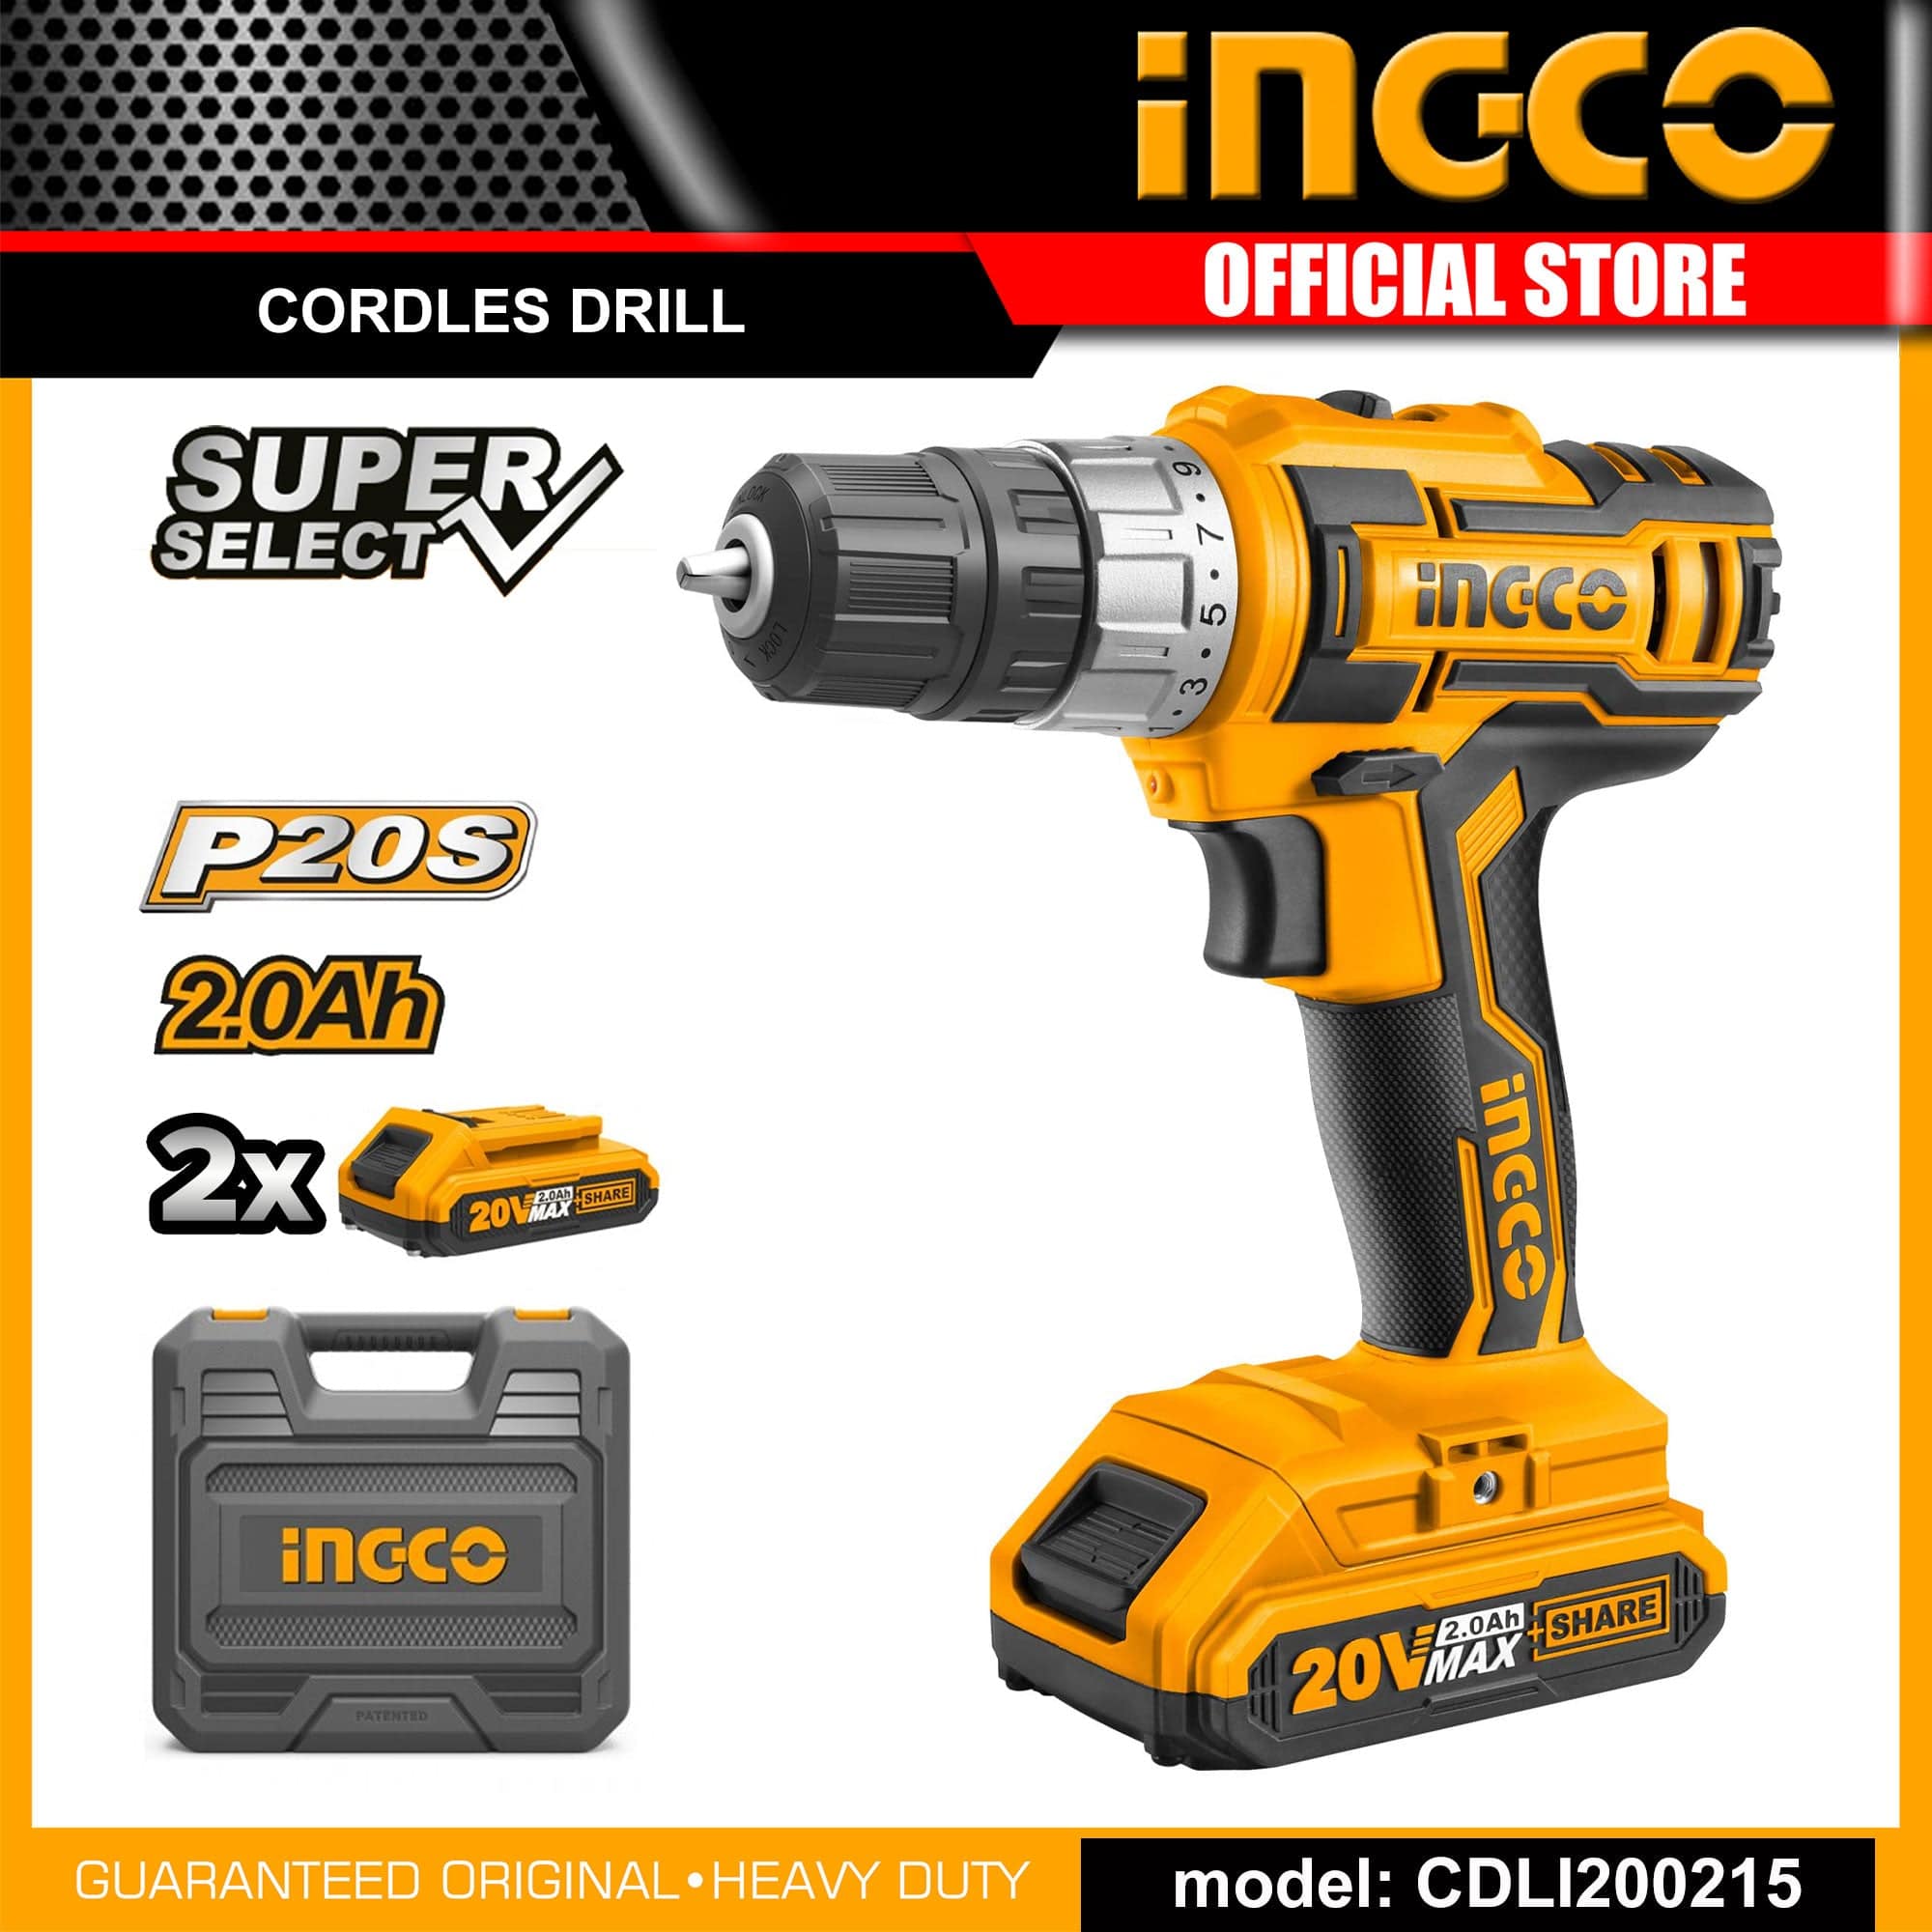 Ingco Lithium-Ion Cordless Drill with Two 20V Batteries - CDLI200215 | Shop Online in Accra, Ghana - Supply Master Drill Buy Tools hardware Building materials